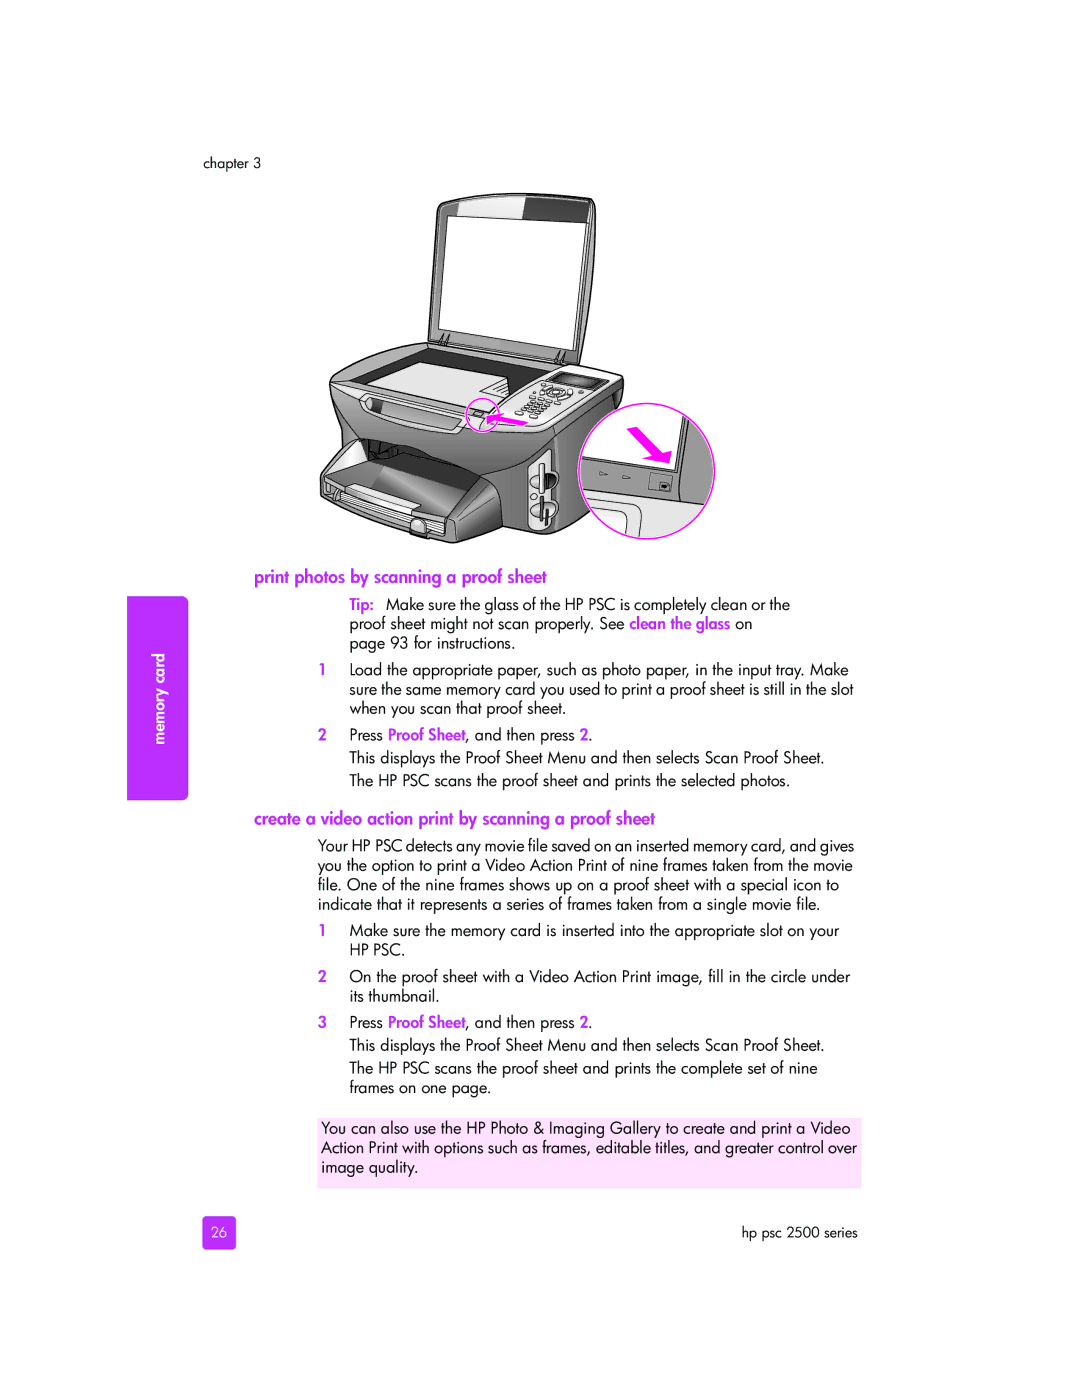 HP 2510xi manual Print photos by scanning a proof sheet, Create a video action print by scanning a proof sheet 